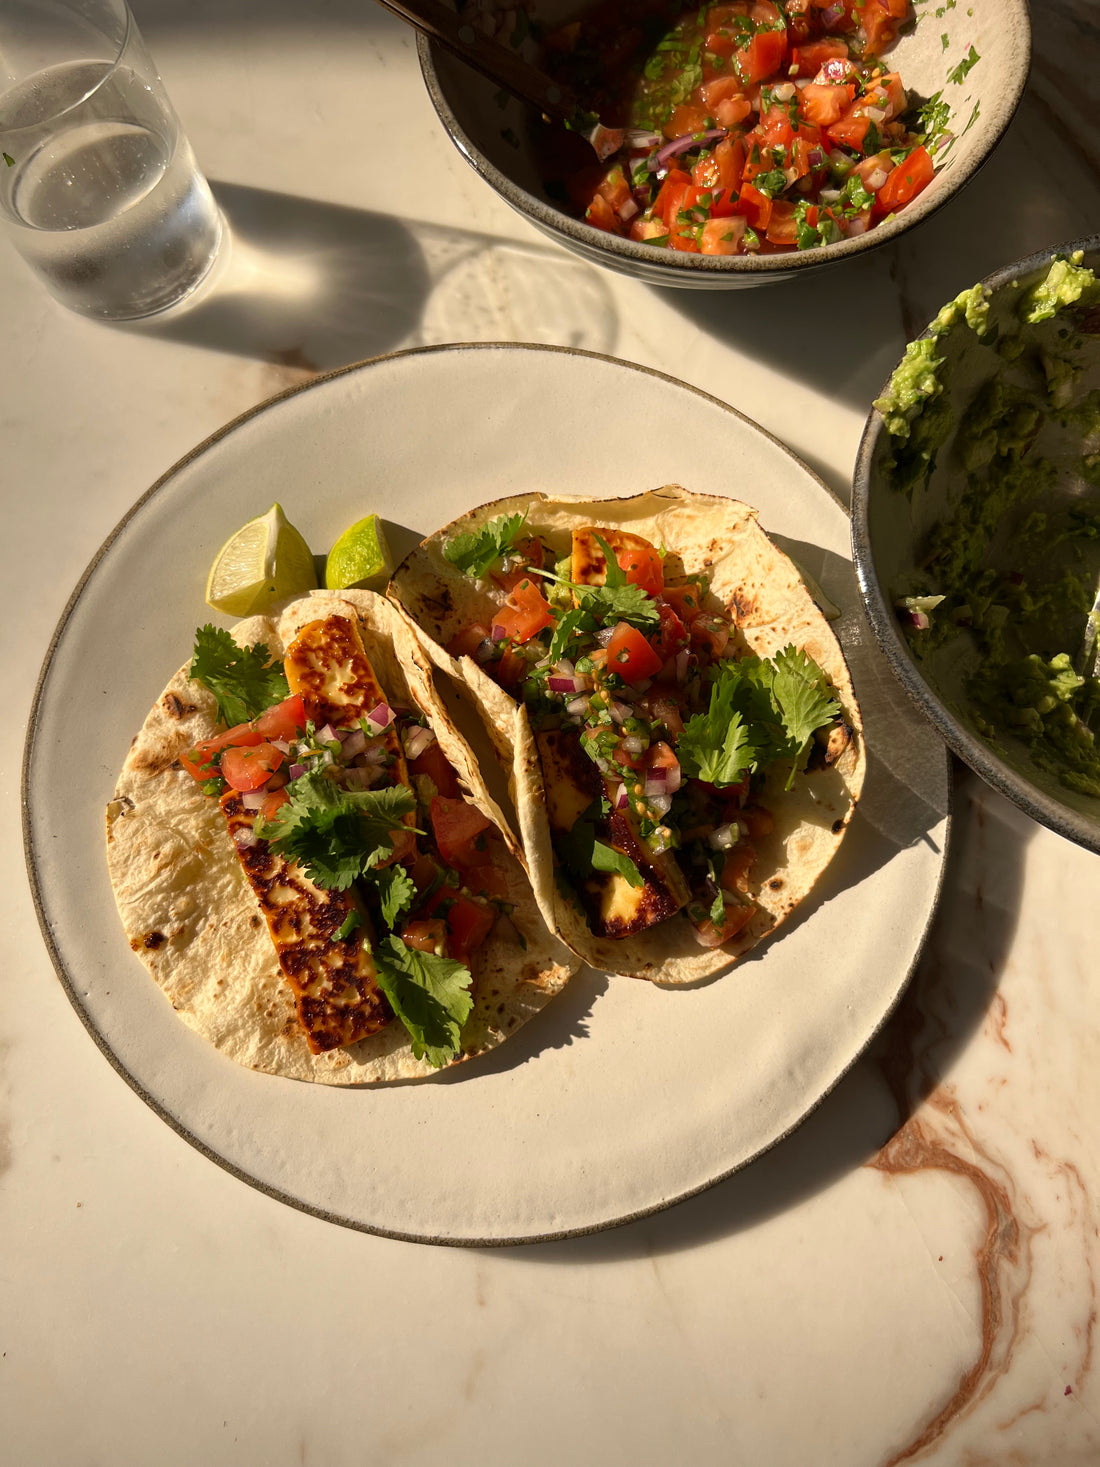 Honey and Chili Halloumi Tacos with Guac and Pico